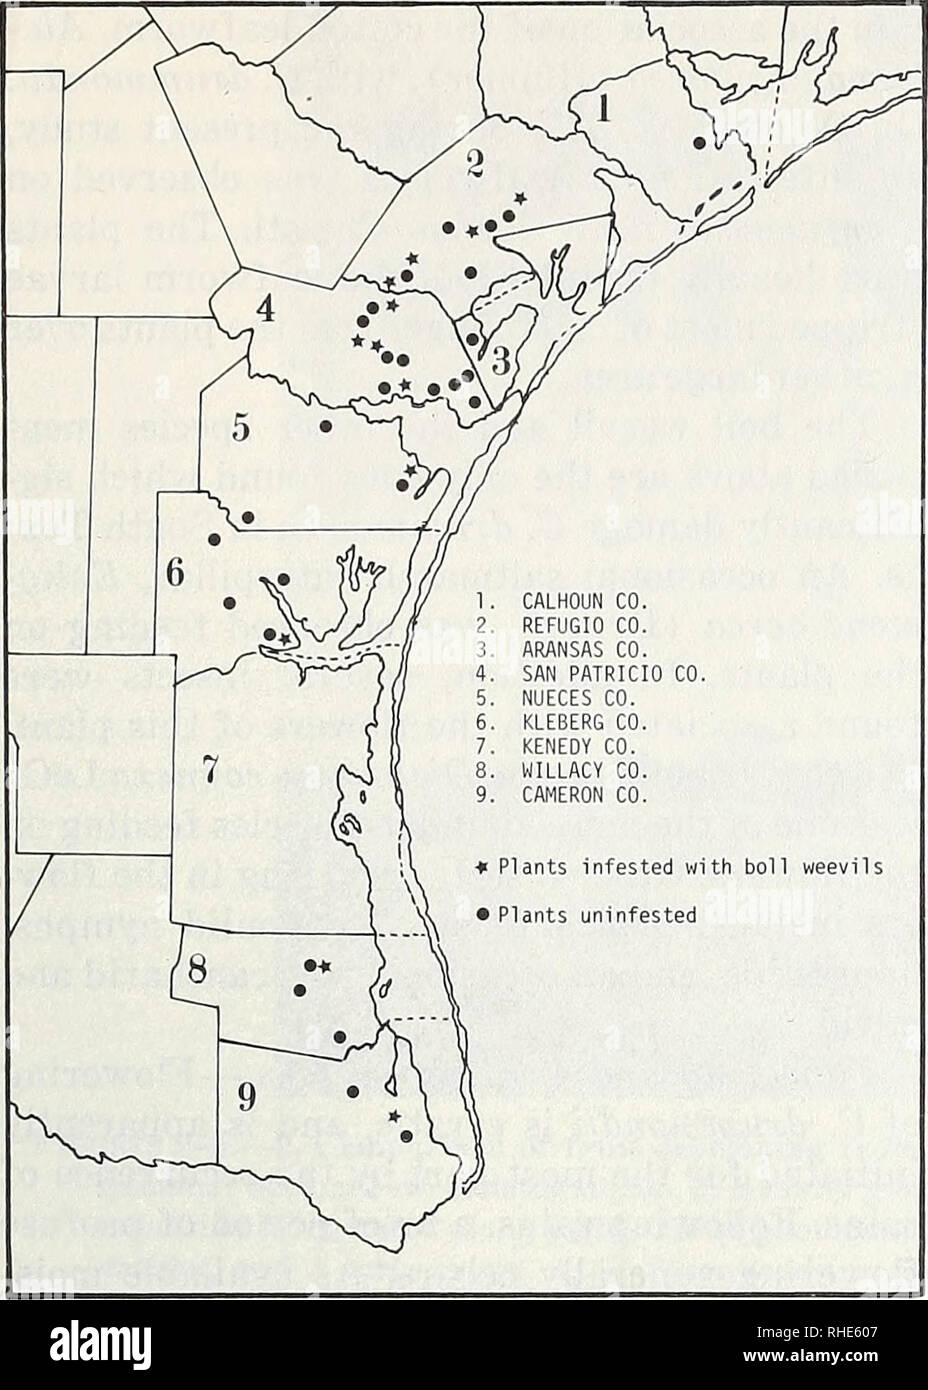 . Boll weevil suppression, management, and elimination technology : proceedings of a conference, February 13-15, 1974, Memphis, Tennessee. Boll weevil, Control, Congresses. Figure 1.—Distribution of Cienfuegosia driimmondii along the lower Texas gulf coast, with designation of localities infested by the boll weevil. Distribution based on records made during the present study, Fryxell (1969), and information provided by M. J. Lukefahr. Coastal Bend region of Texas (Gould and Box 1965). Kenedy County is the only county in this series in which C. drummondii is not known to occur. The reason for t Stock Photo